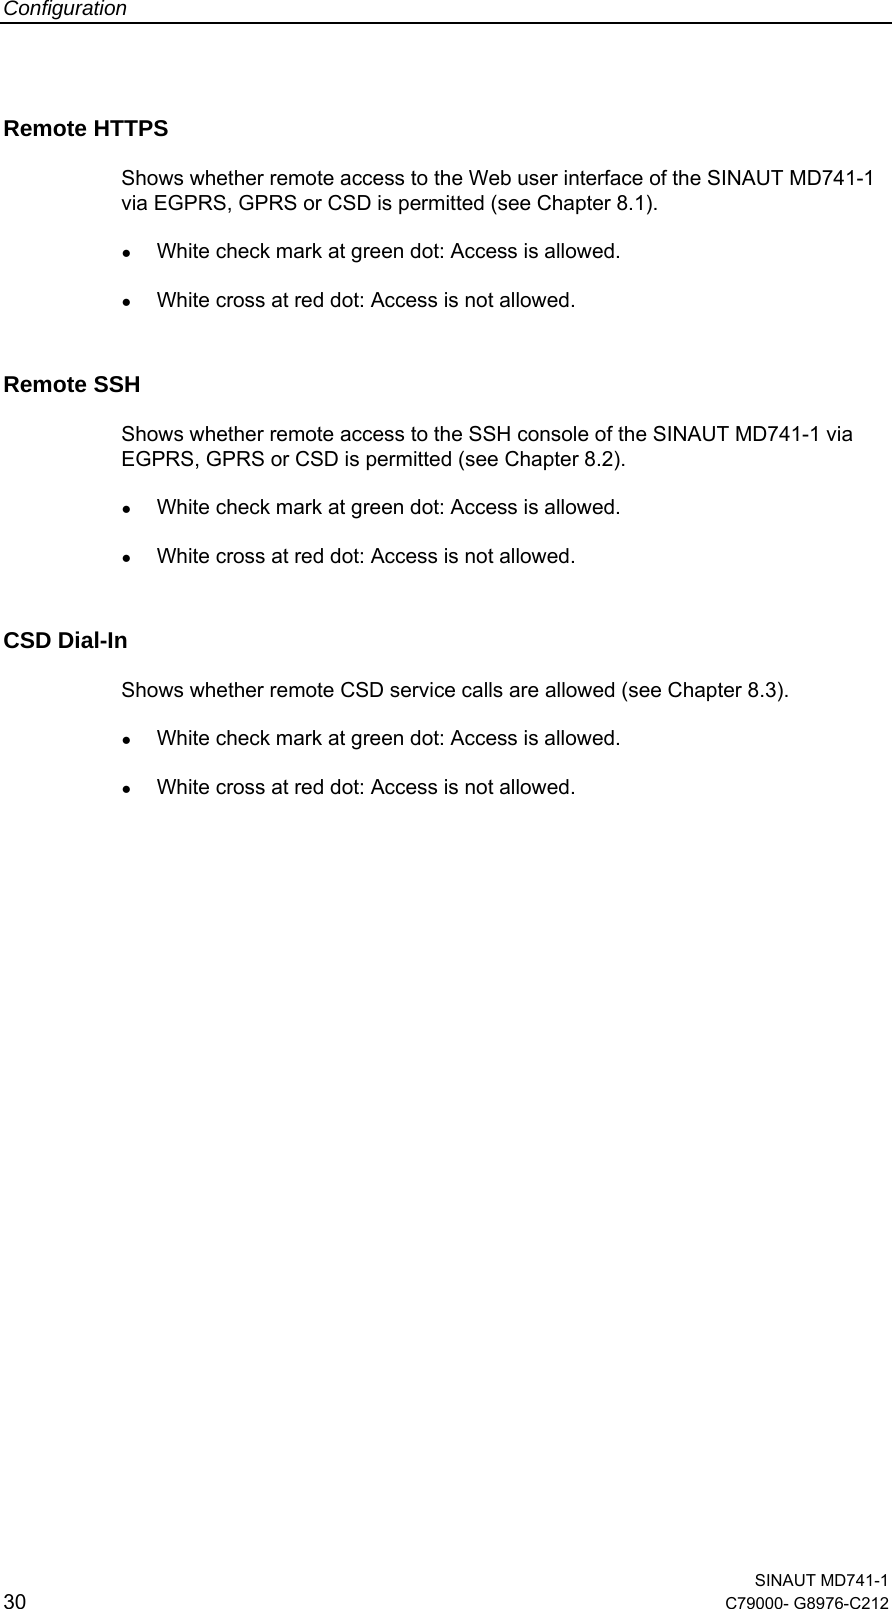 Configuration  SINAUT MD741-1 30  C79000- G8976-C212   Remote HTTPS Shows whether remote access to the Web user interface of the SINAUT MD741-1 via EGPRS, GPRS or CSD is permitted (see Chapter 8.1). ● White check mark at green dot: Access is allowed. ● White cross at red dot: Access is not allowed. Remote SSH Shows whether remote access to the SSH console of the SINAUT MD741-1 via EGPRS, GPRS or CSD is permitted (see Chapter 8.2). ● White check mark at green dot: Access is allowed. ● White cross at red dot: Access is not allowed. CSD Dial-In Shows whether remote CSD service calls are allowed (see Chapter 8.3). ● White check mark at green dot: Access is allowed. ● White cross at red dot: Access is not allowed.                        